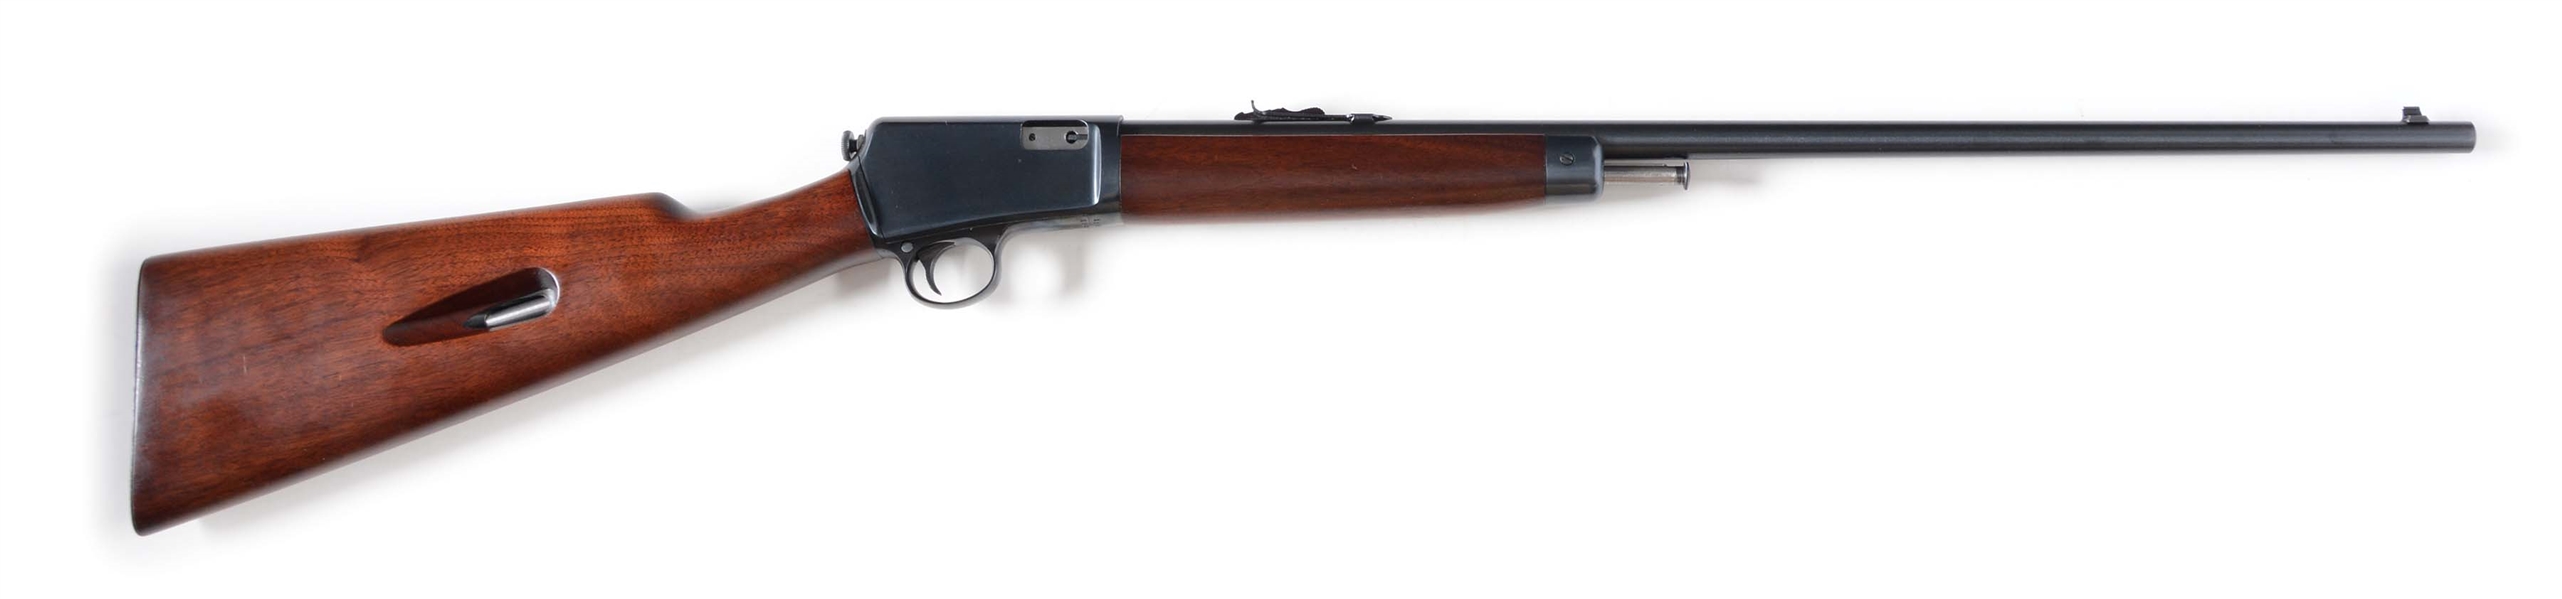 (C) RARE STRAIGHT STOCK AS NEW MINTY WINCHESTER MODEL 63 SEMI-AUTOMATIC RIFLE (1954).